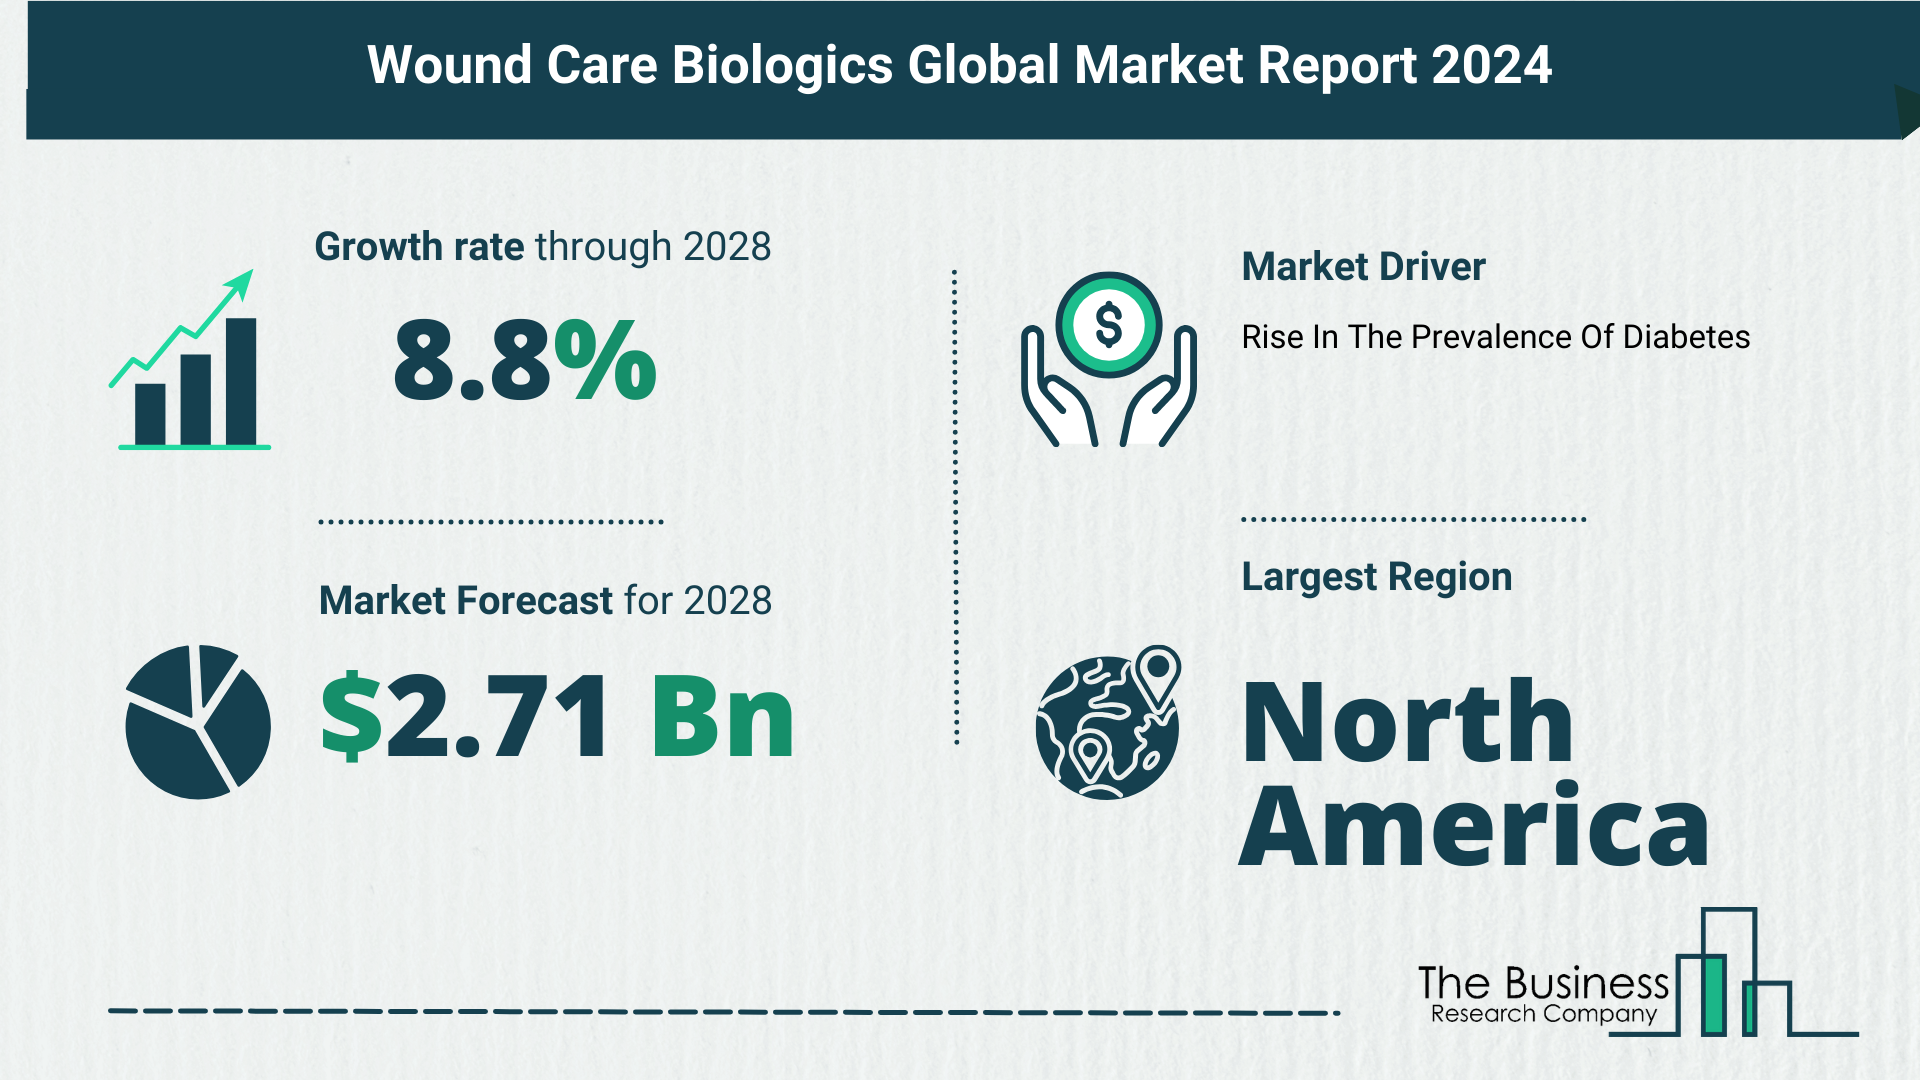 Global Wound Care Biologics Market Analysis: Estimated Market Size And Growth Rate